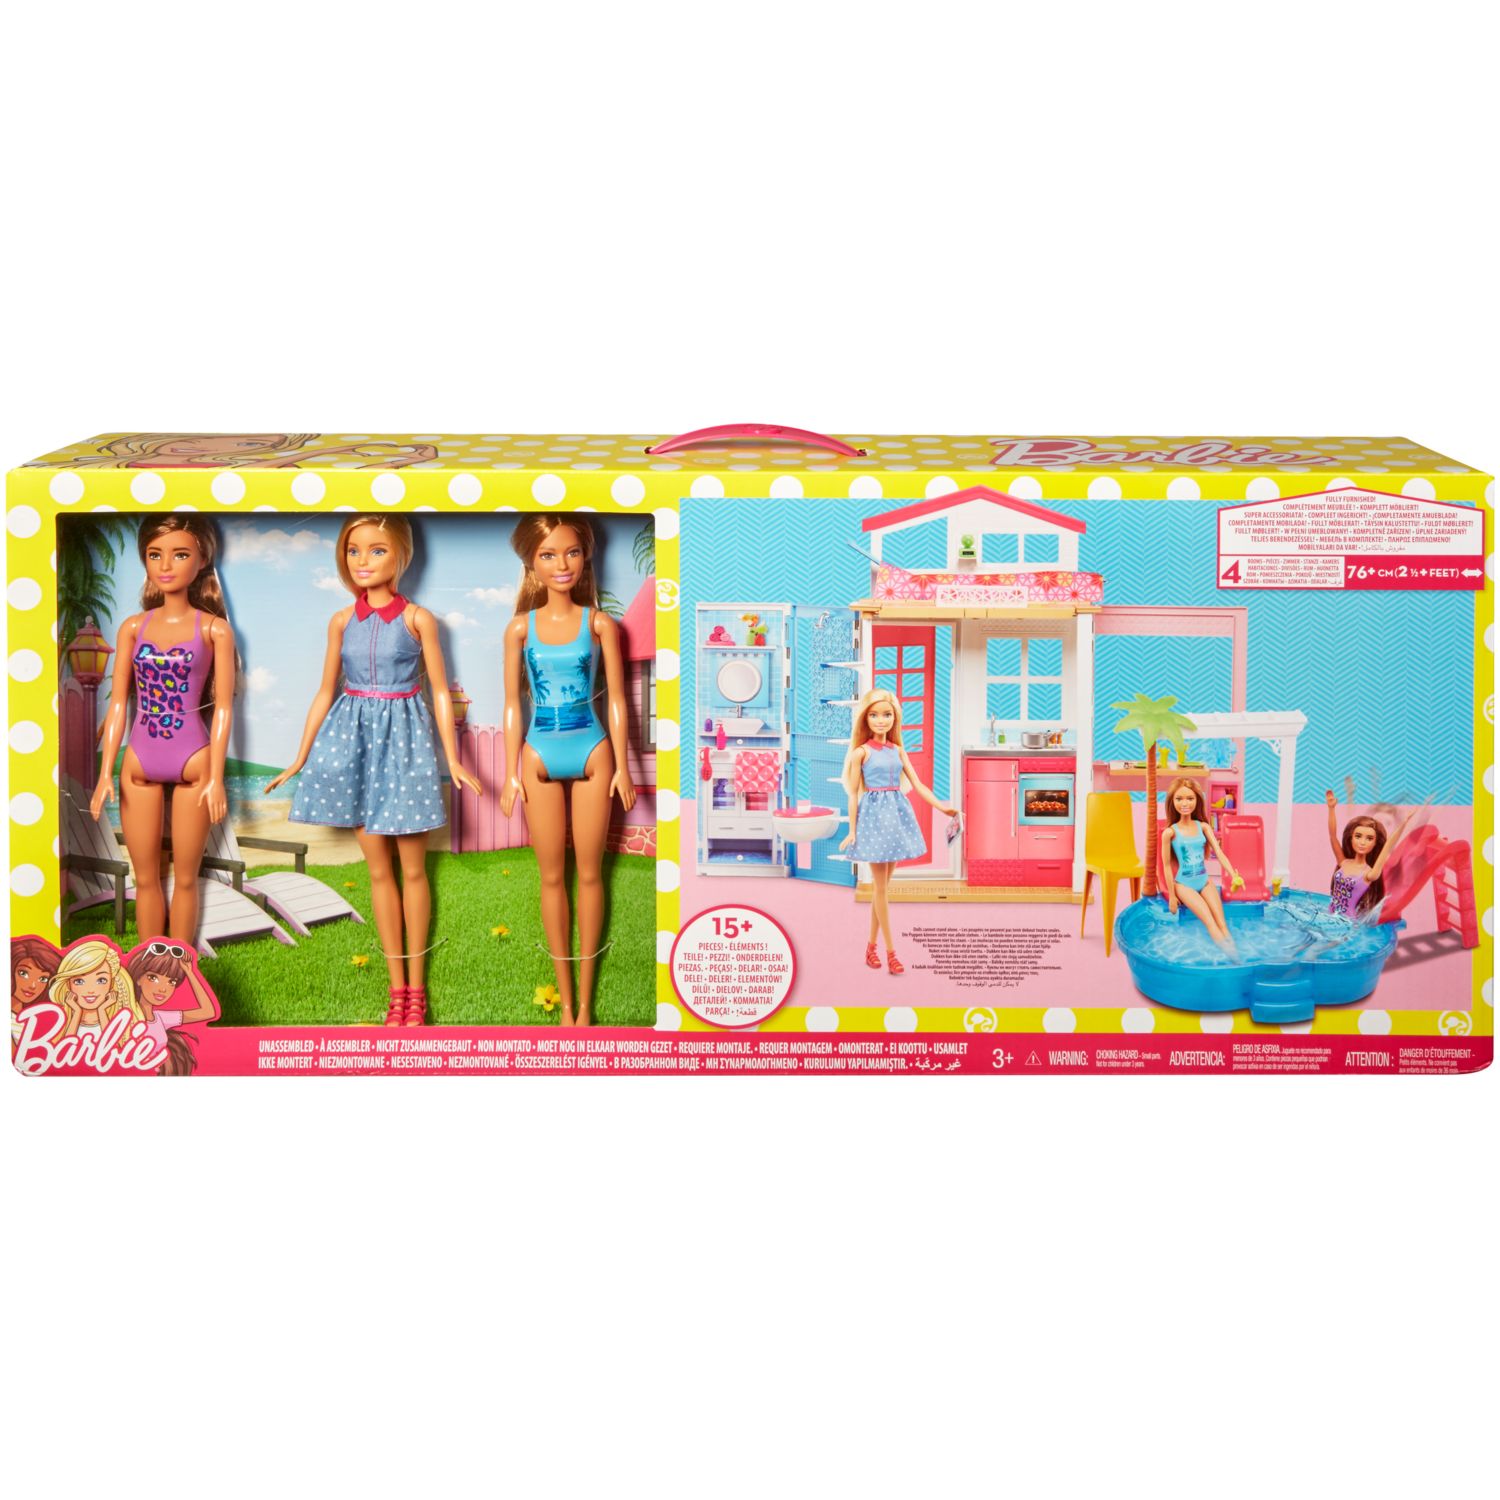 complete barbie home set with 3 dolls